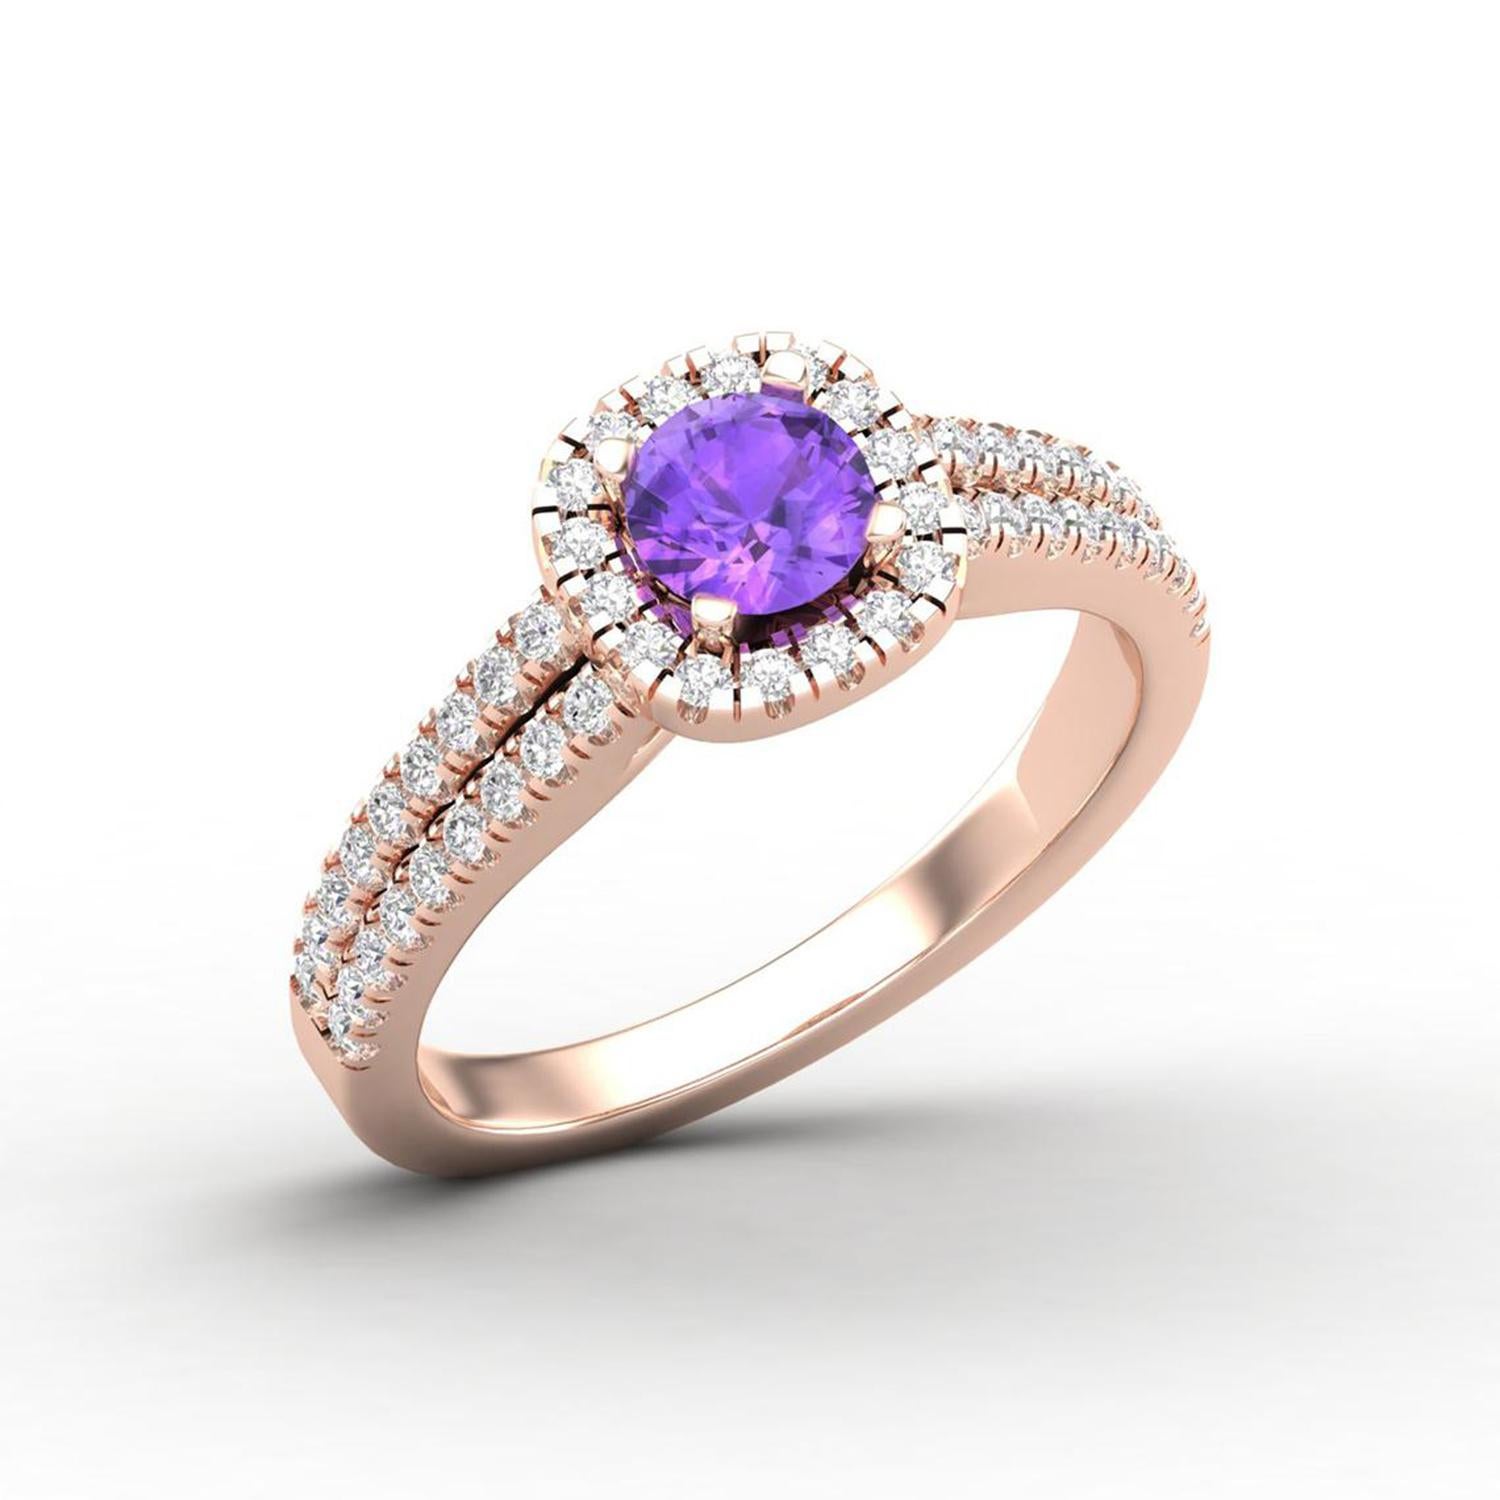 Women's 14 K Gold Round Amethyst Ring / Round Diamond Ring / Solitaire Ring For Sale